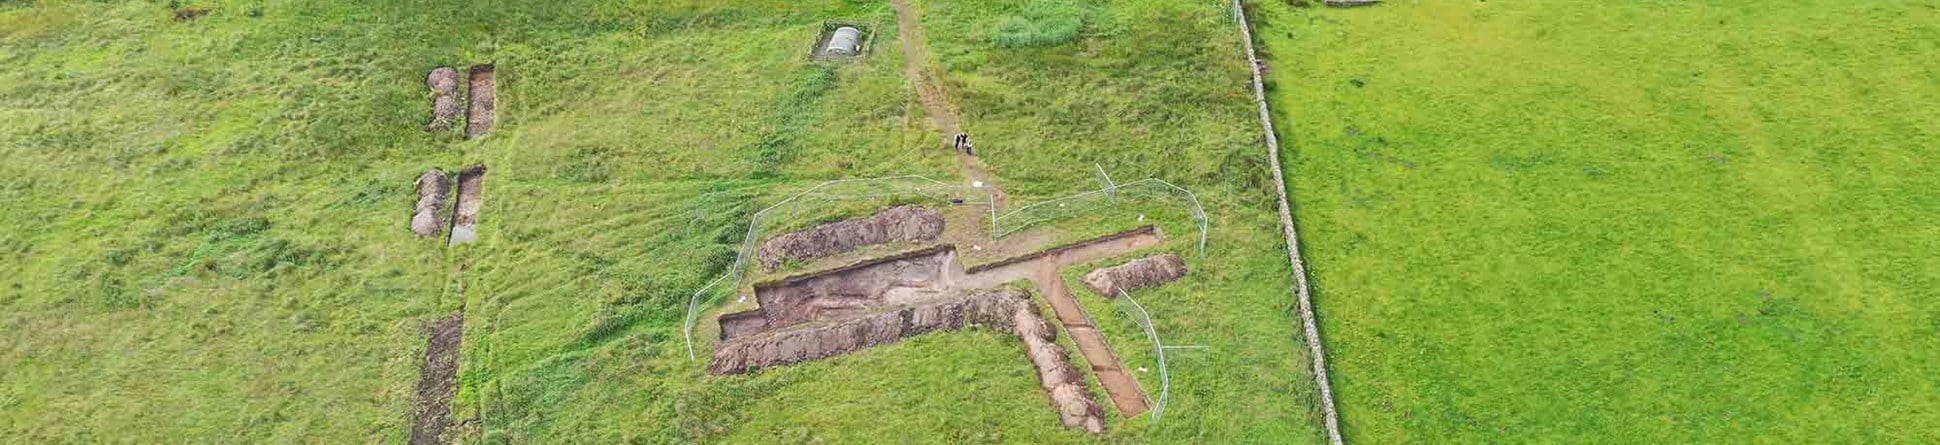 Aerial view of excavations with buildings in the background